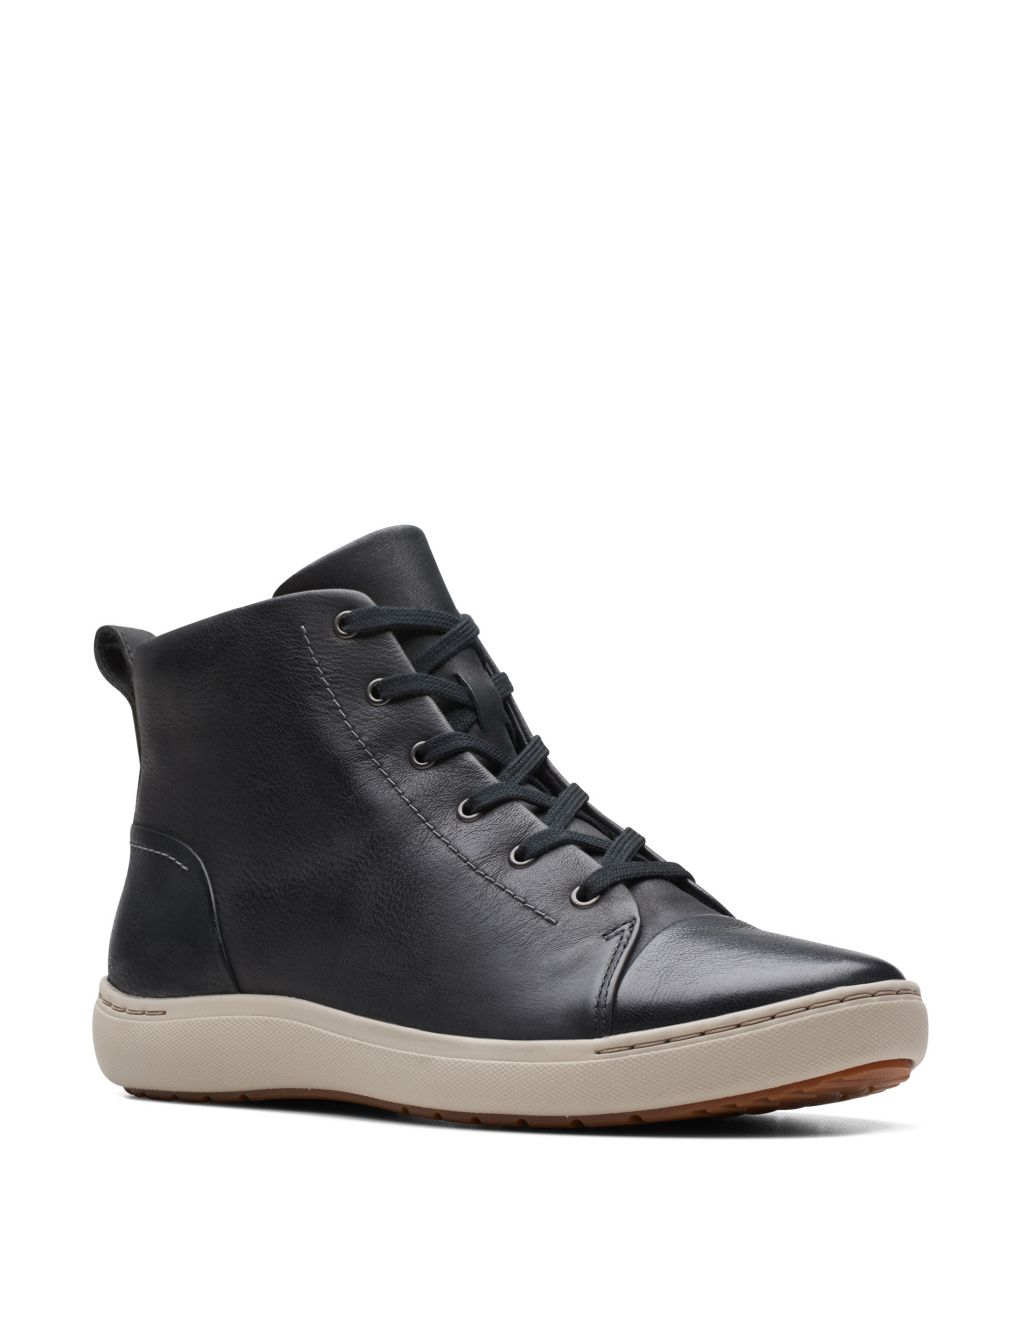 Leather Lace Up High Top Trainers image 2